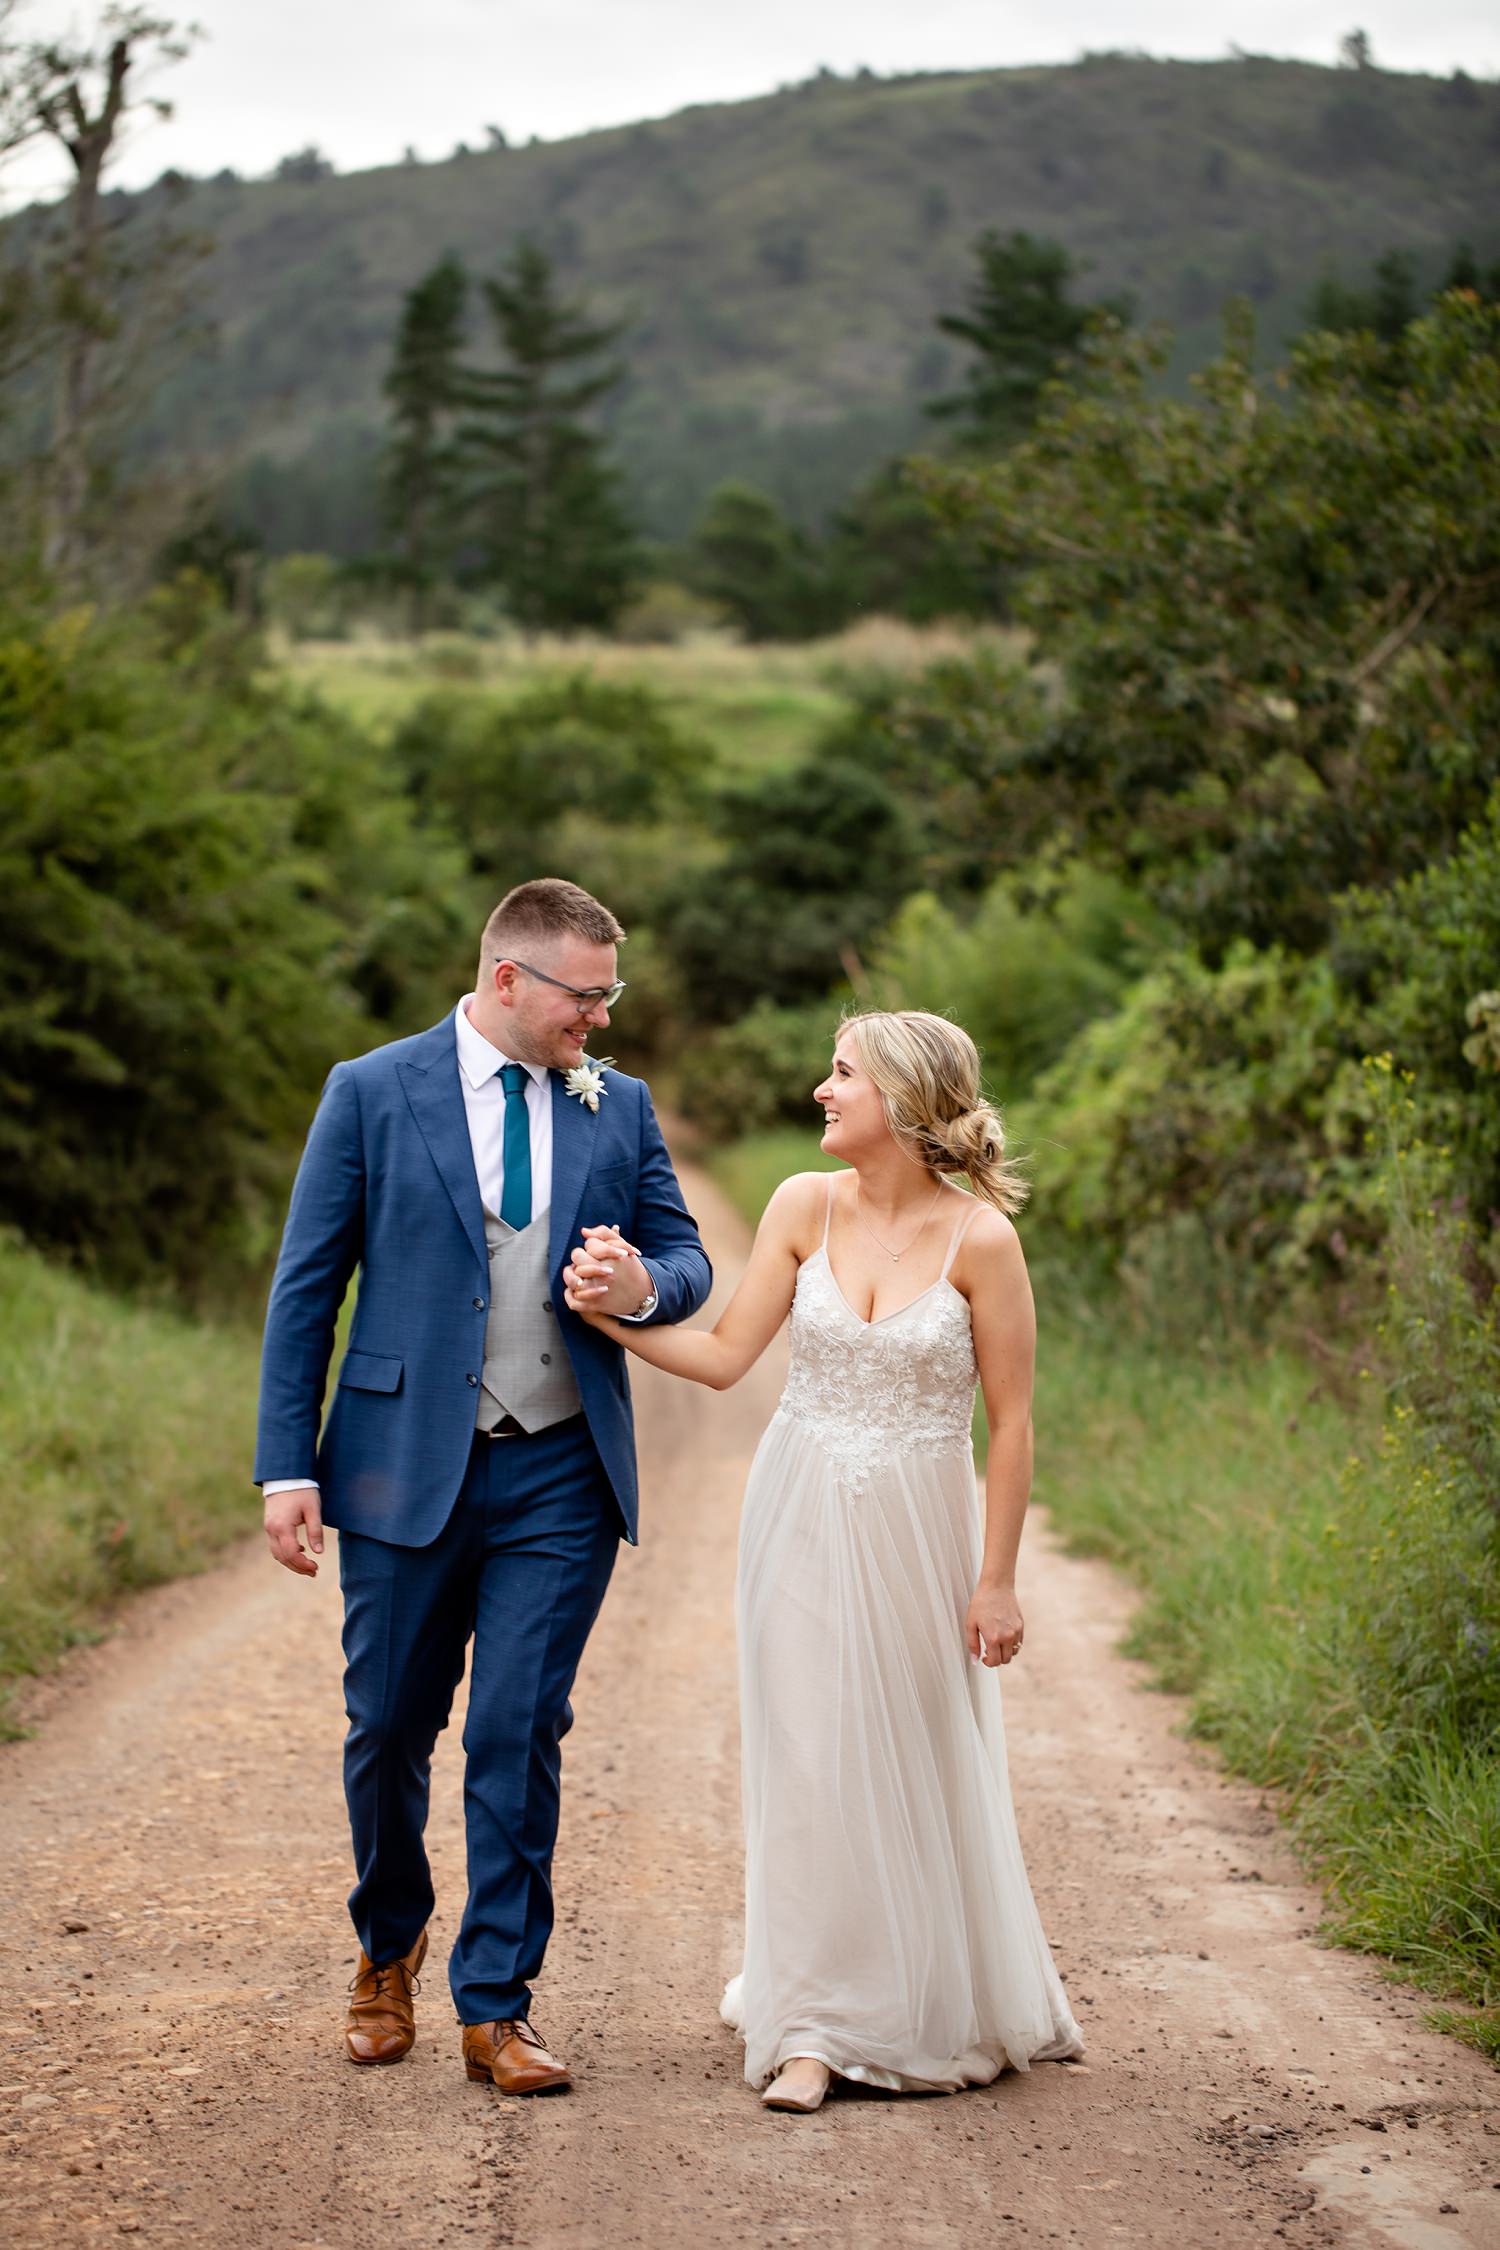 Real laughter and real moments between the bride and groom during their couple photo session on a farm road